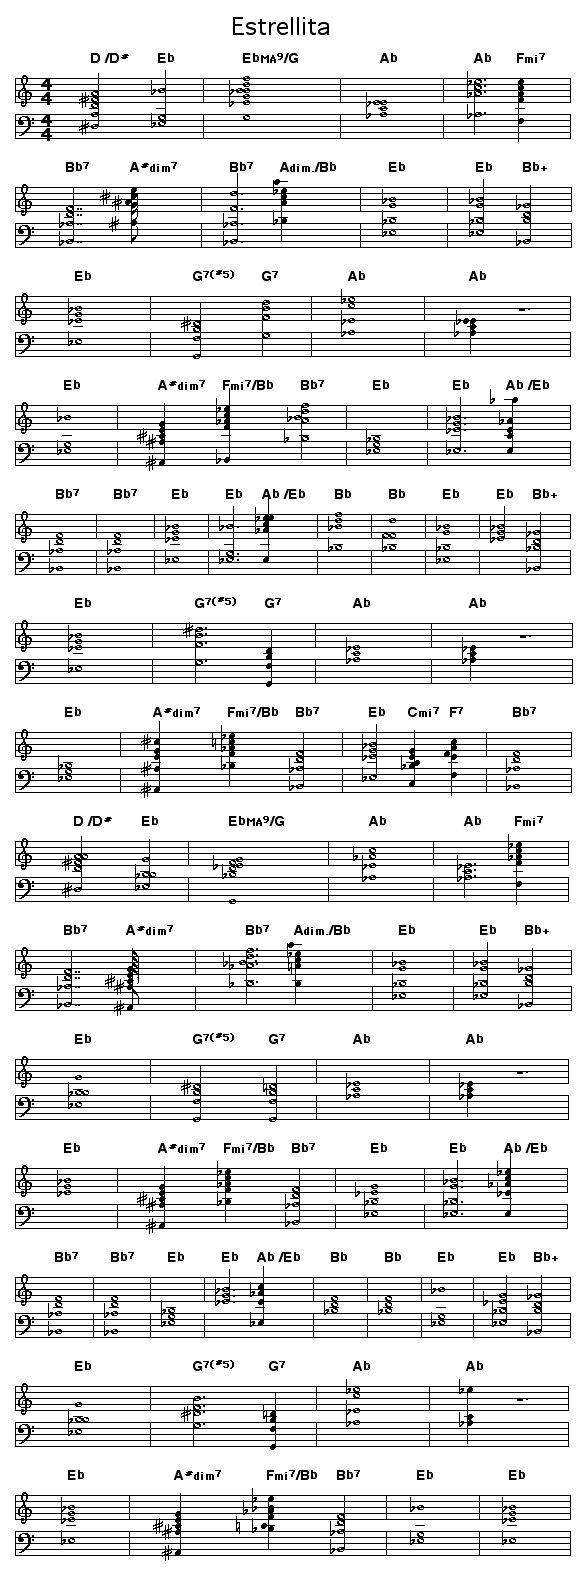 Estrellita: Chord changes for Manual M. Ponce's "Estrellita", which means "Little Star" in English.